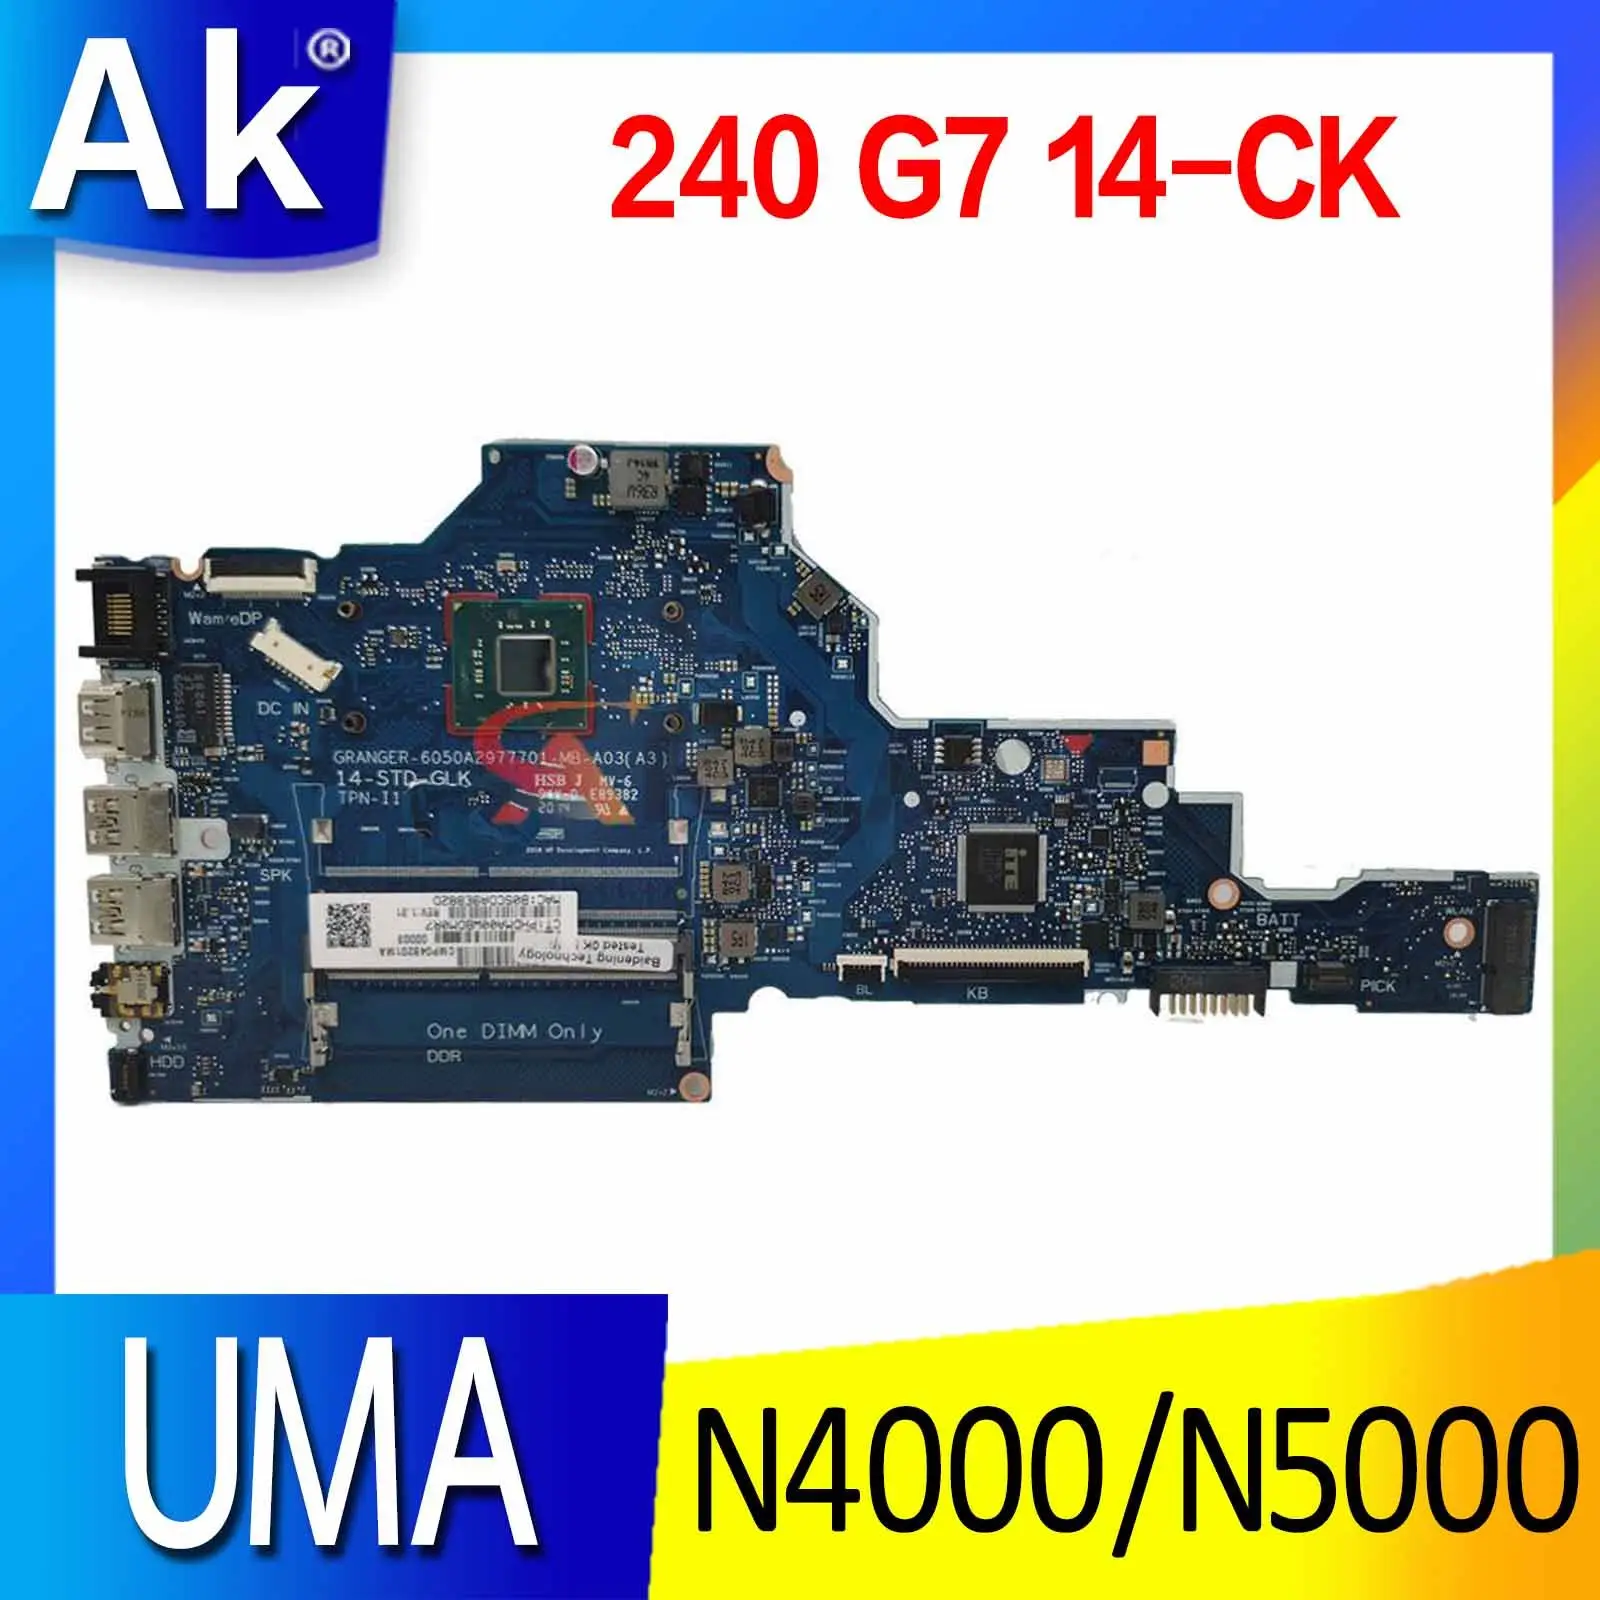 

For Hp 240 G7 14-CK Laptop Motherboard with N4000 N5000 CPU L23234-601 L23236-001 Notebook mainboard 6050A2977701-MB UMA